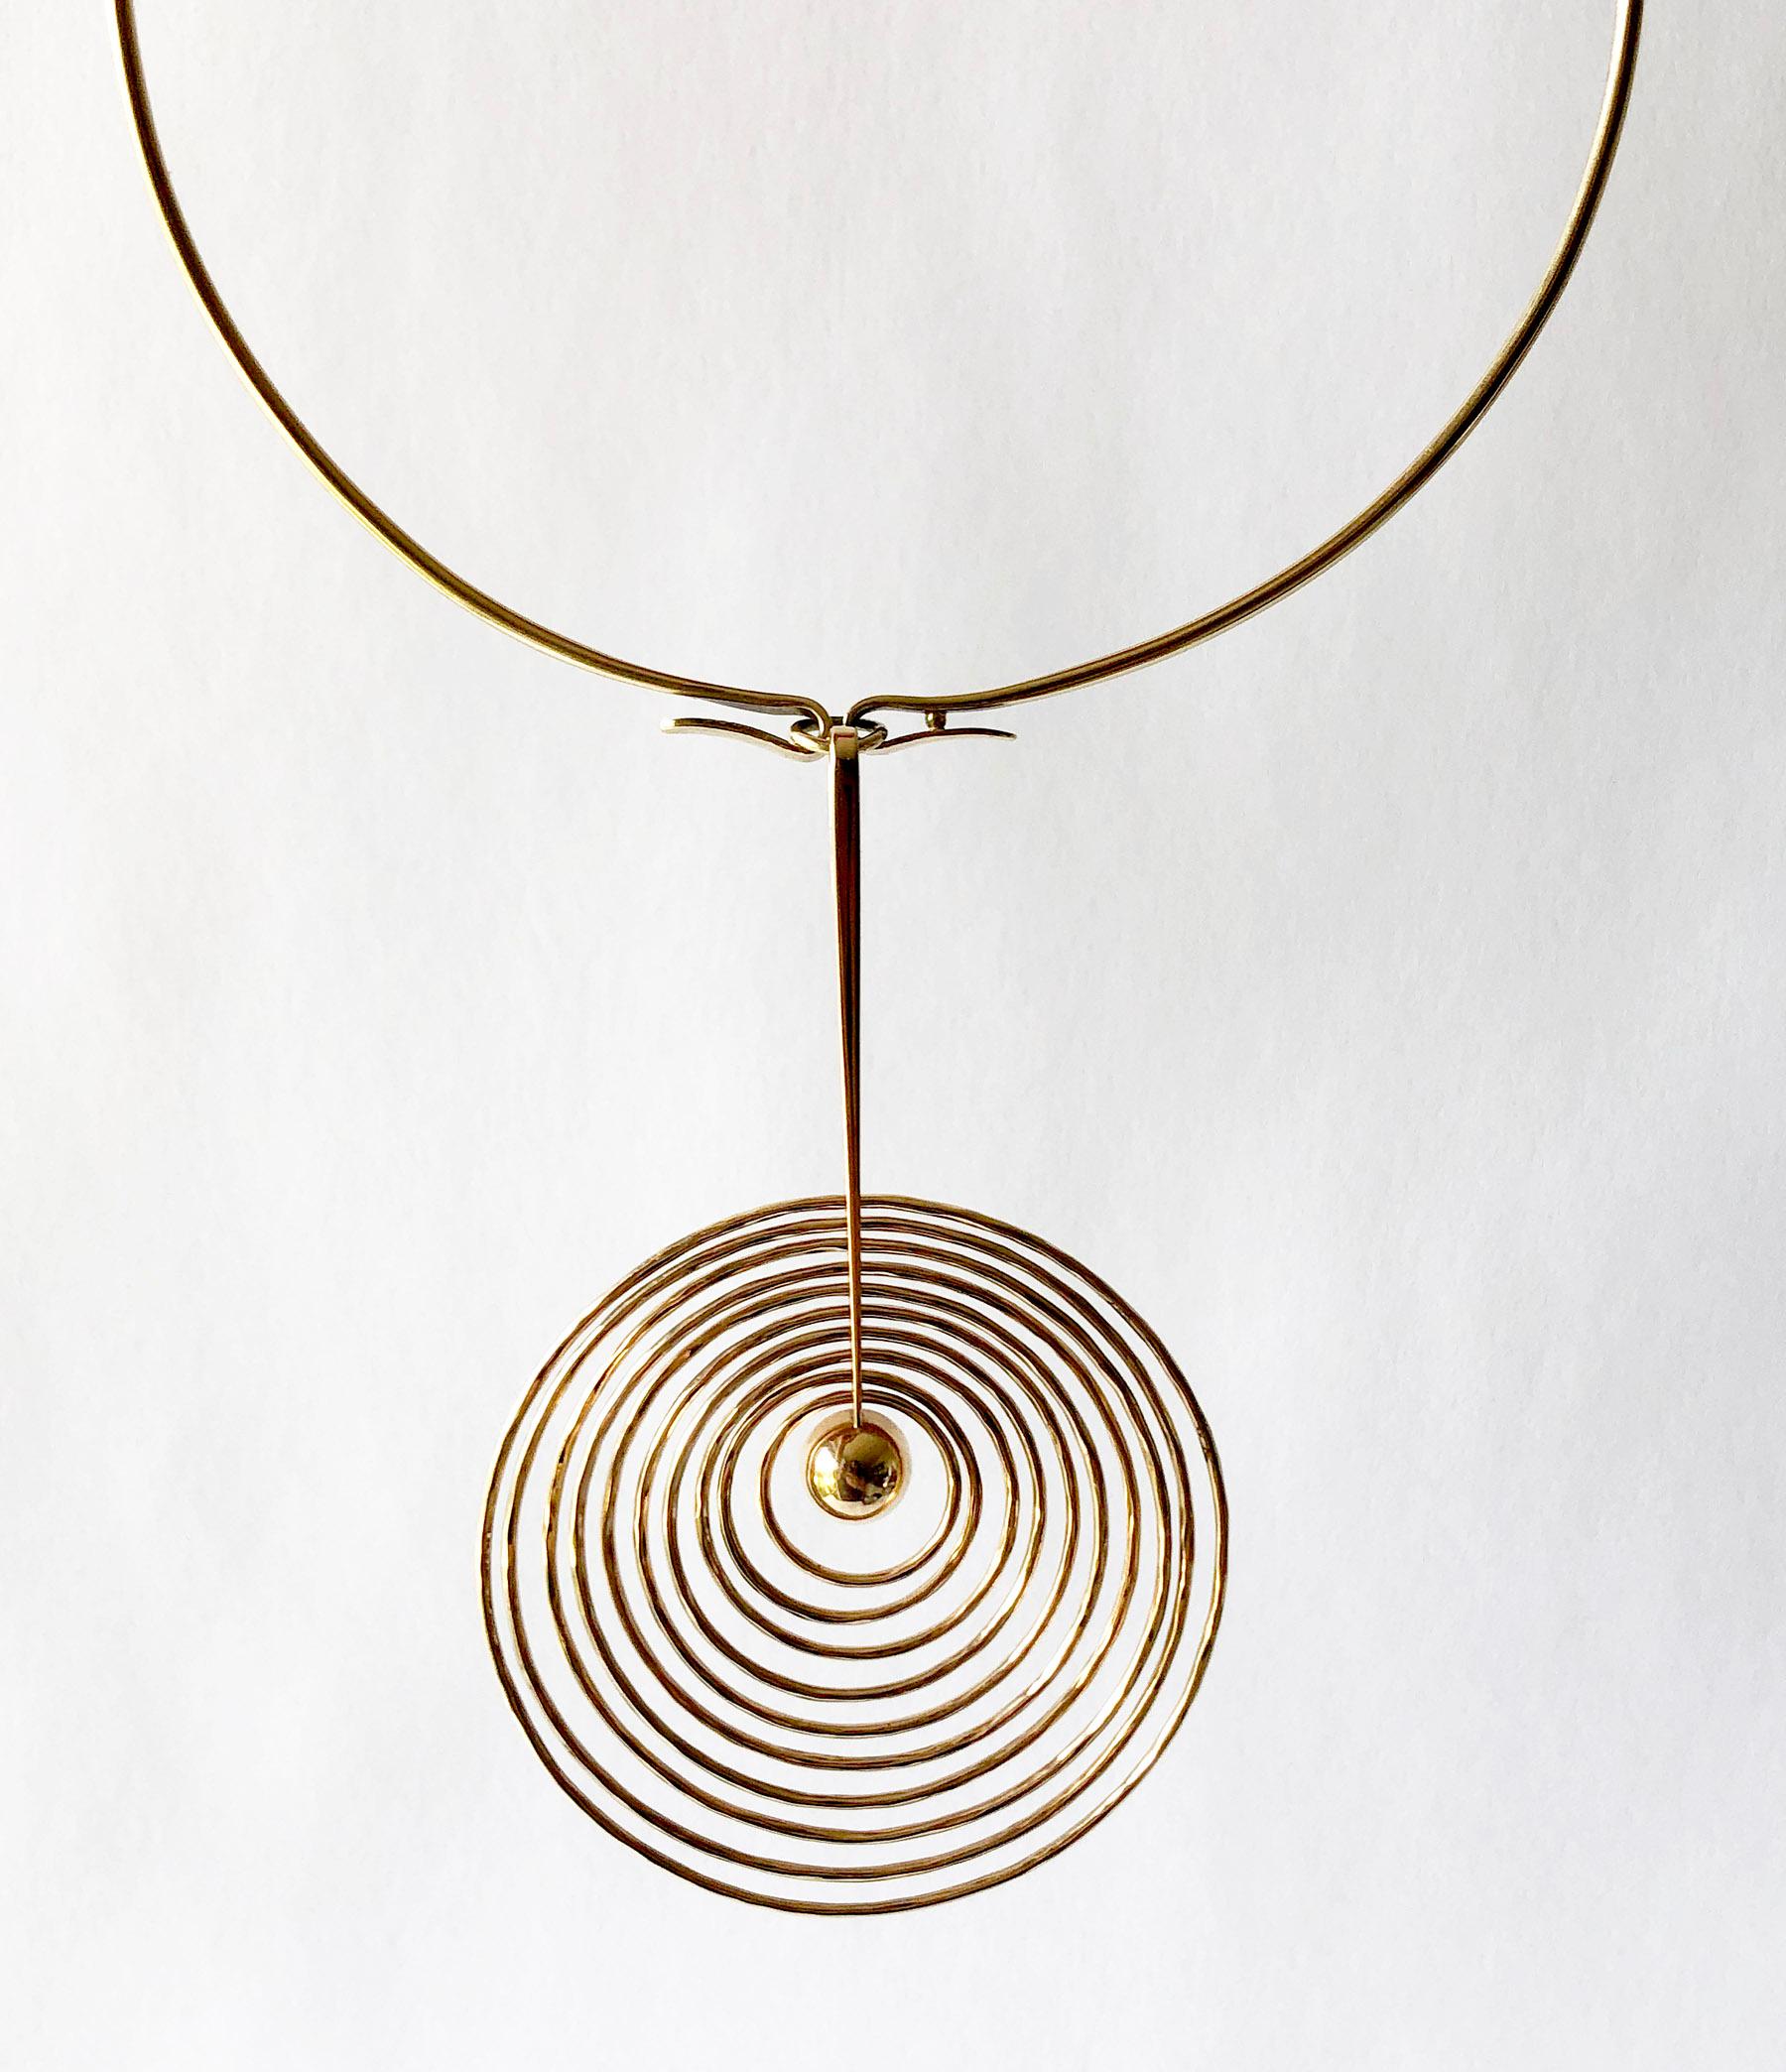 A 1960s 14k gold kinetic concentric circle pendant necklace and matching earrings created by Bent Gabrielsen of Denmark. The necklace torque measures about 15